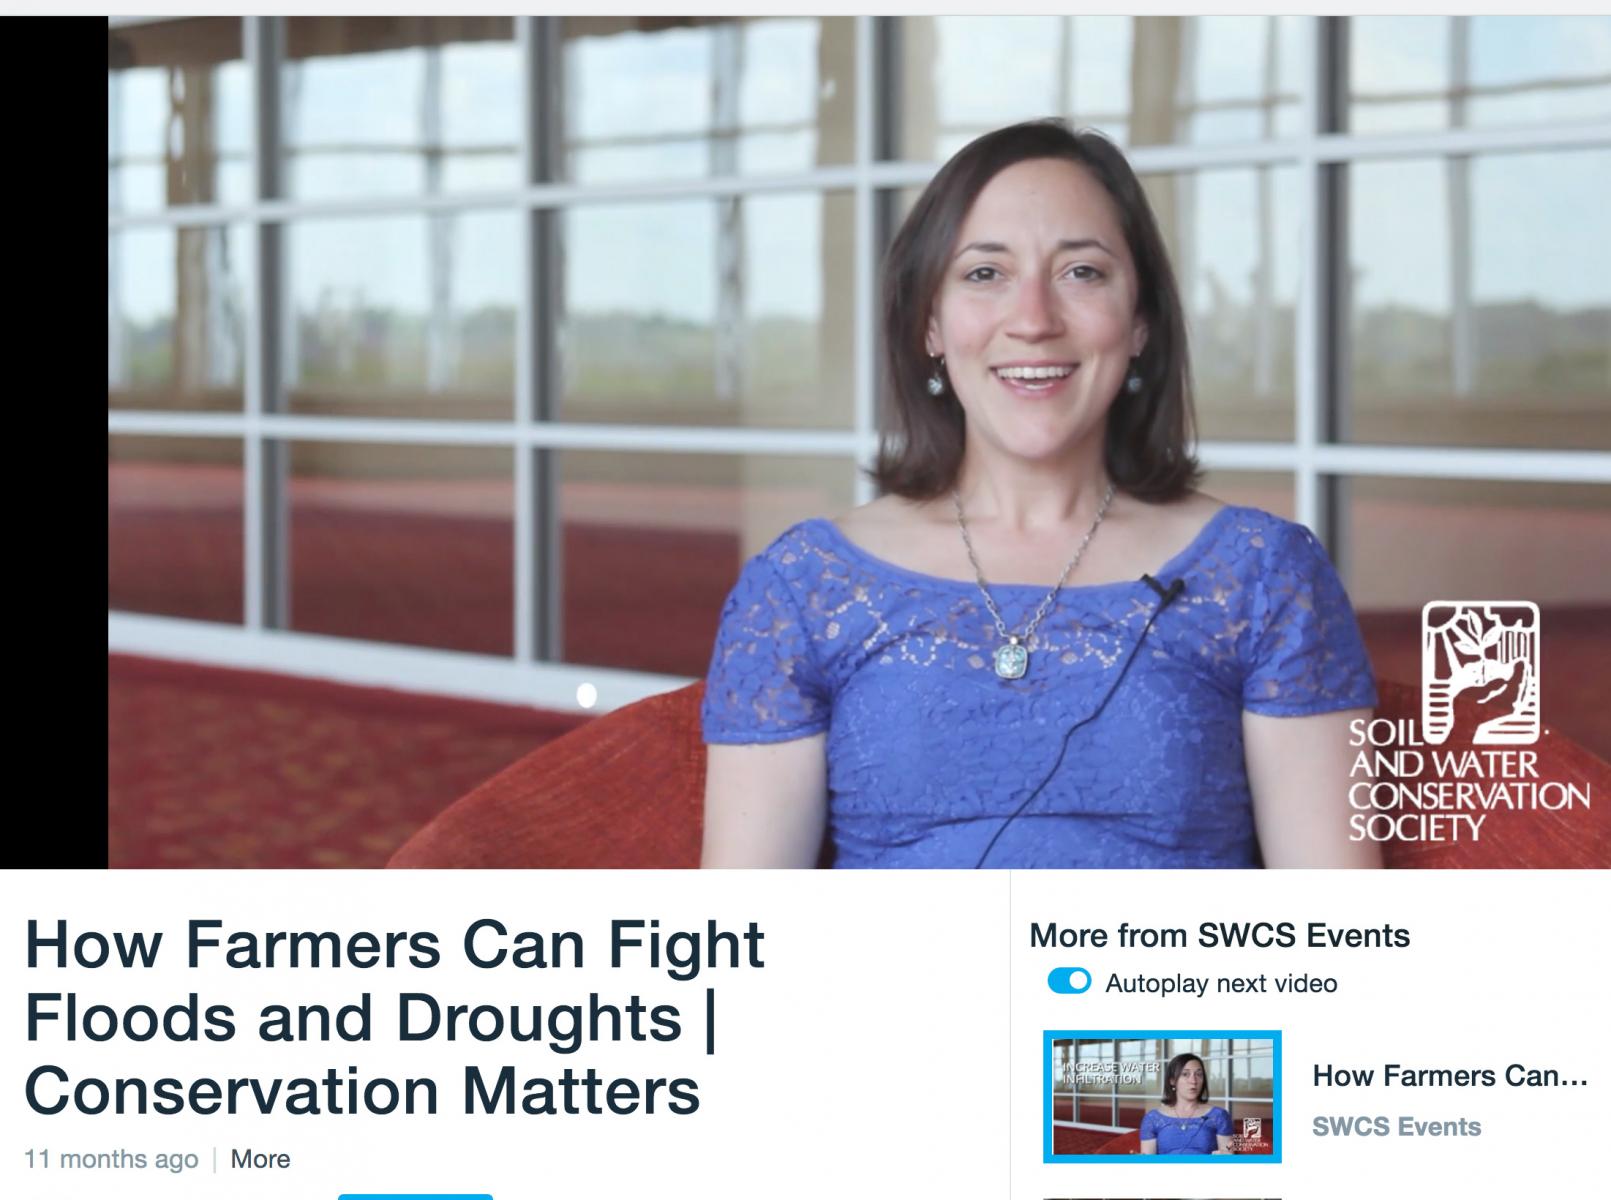 Soil and Water Conservation Society “Conservation Matters”